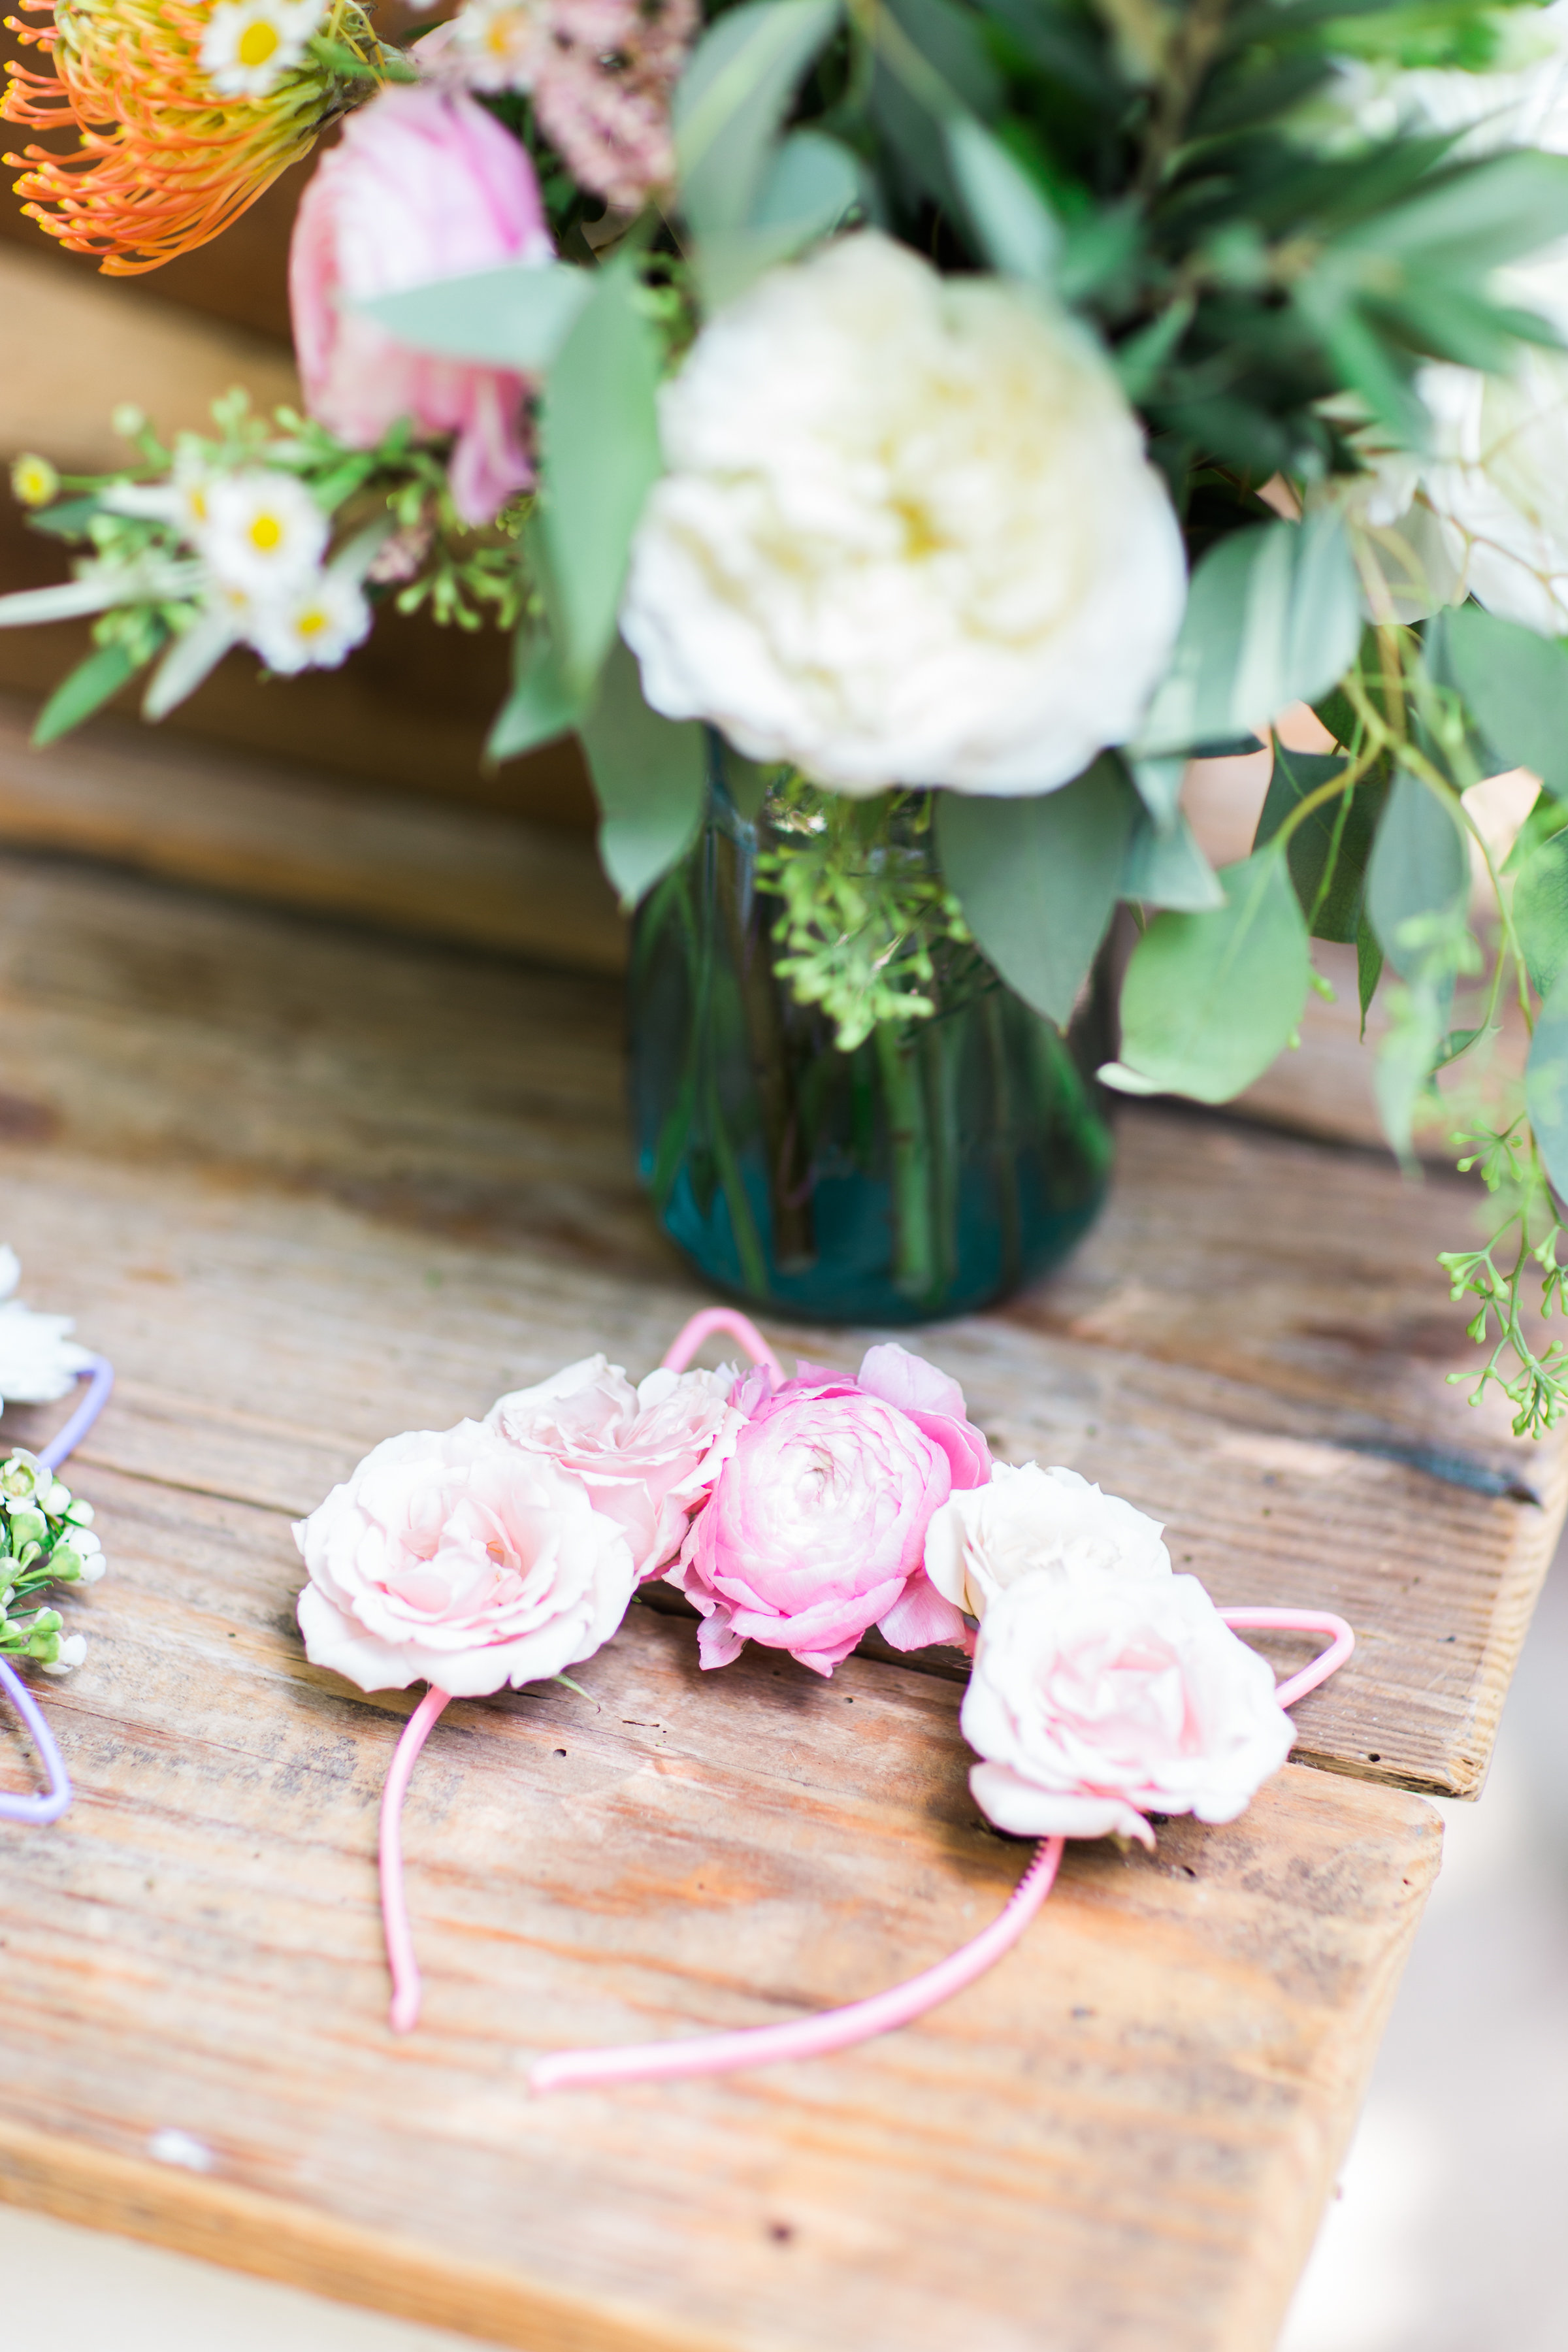 Behind-the-Scenes of a Whimsical Bohemian Backyard Birthday Festival: "flower crown" cat and bunny ears. Click through for the details. | glitterinc.com | @glitterinc